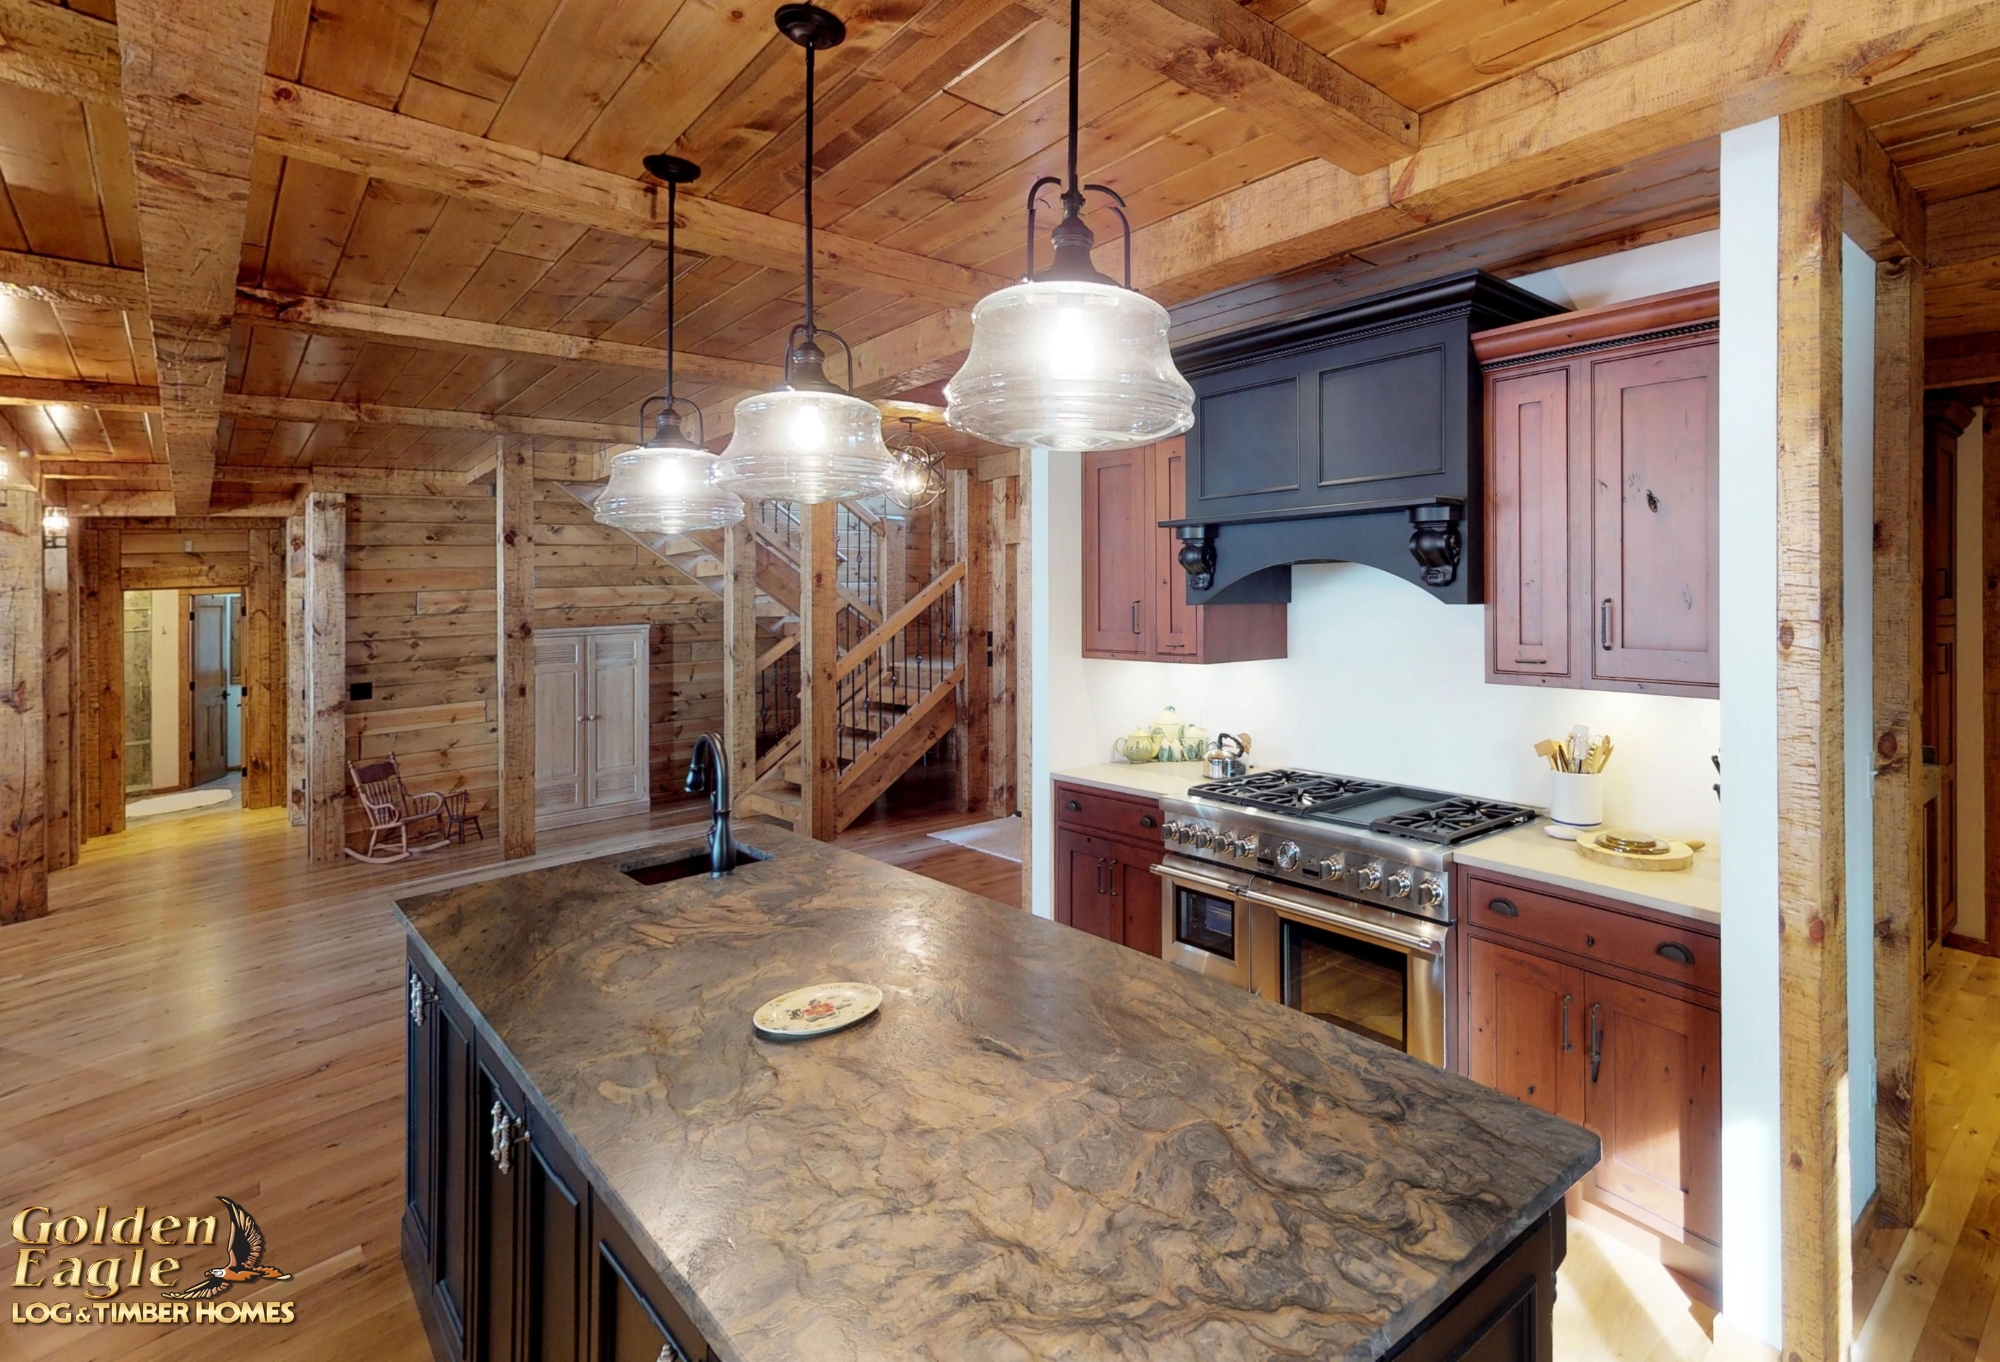 Golden Eagle Log And Timber Homes Exposed Beam Timber